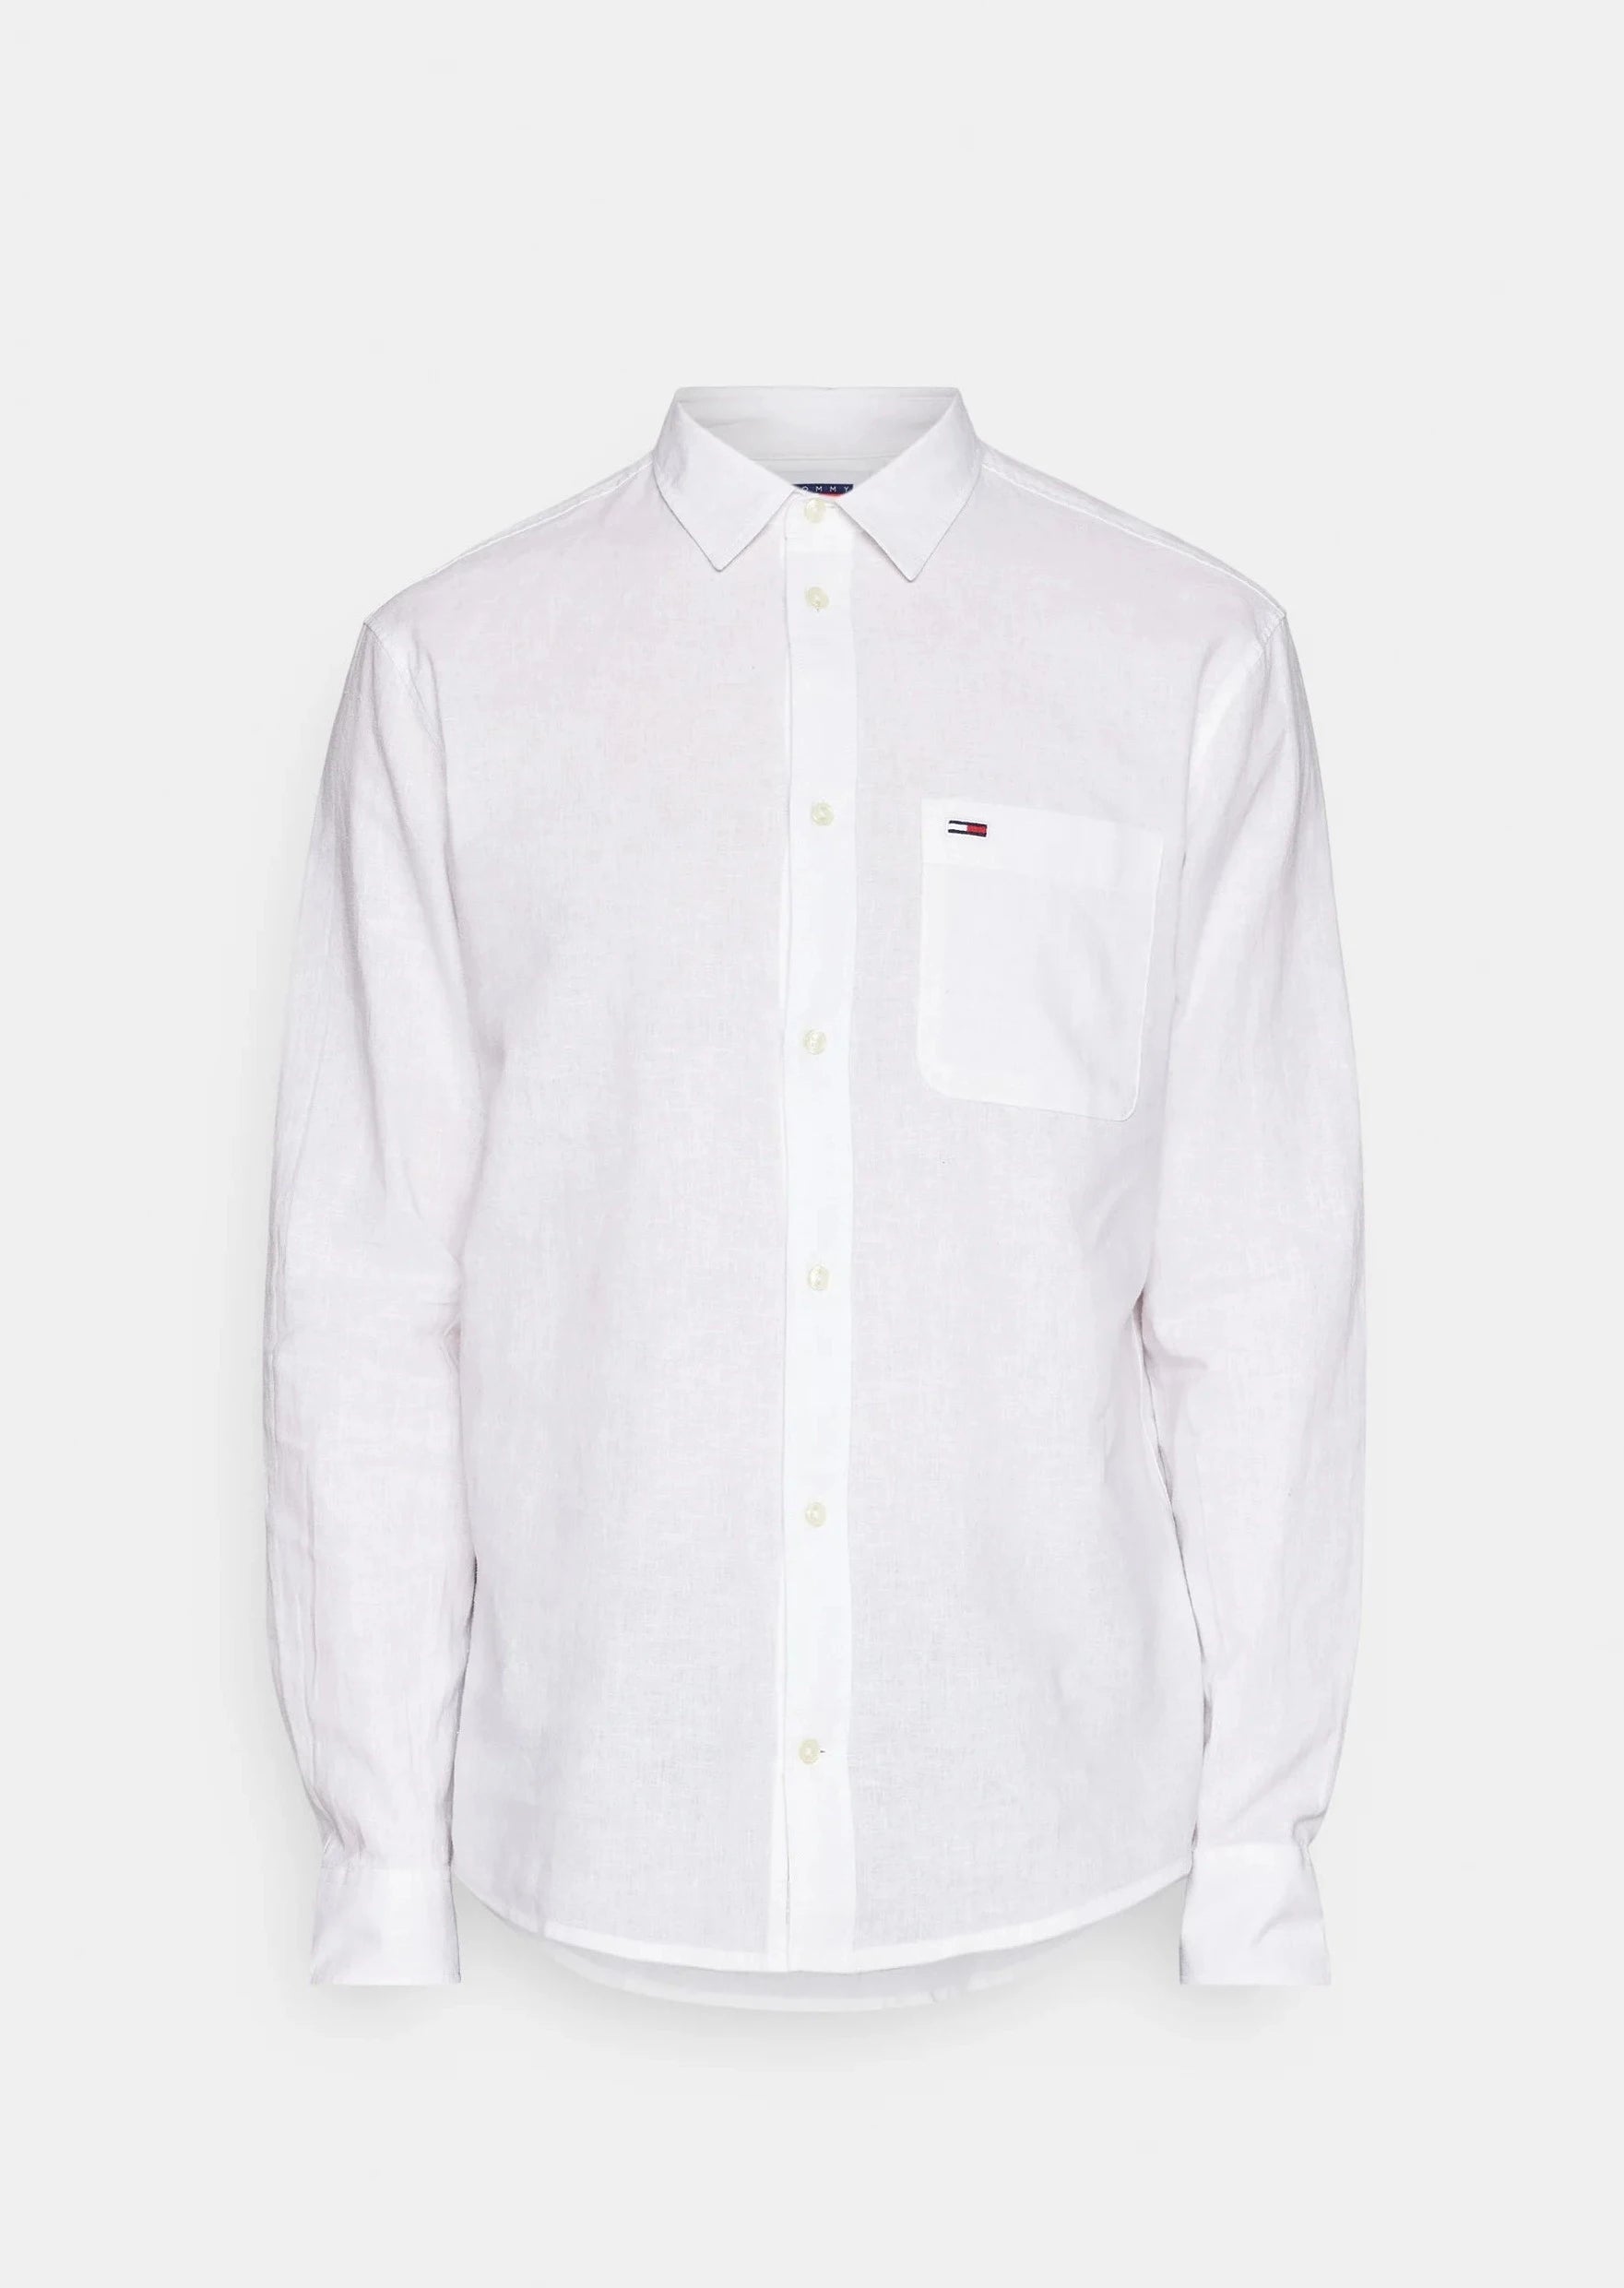 Chemise homme Tommy Jeans blanche en lin | Georgespaul